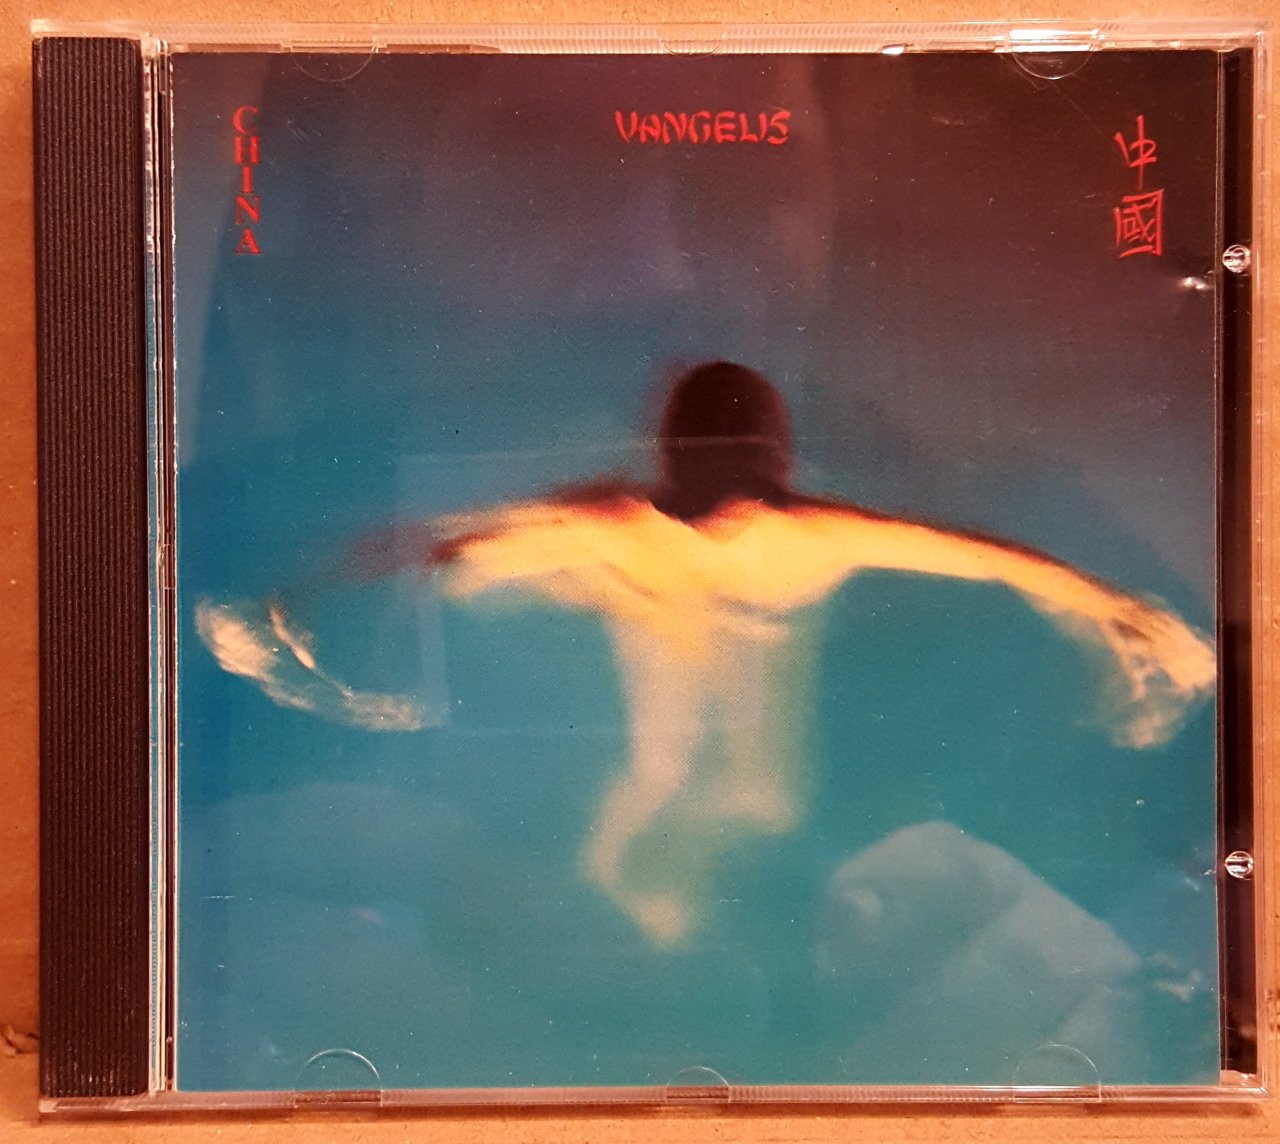 VANGELIS - CHINA (1979) - CD NEW AGE/SYNTH POP/AMBIENT MADE IN USA 2.EL